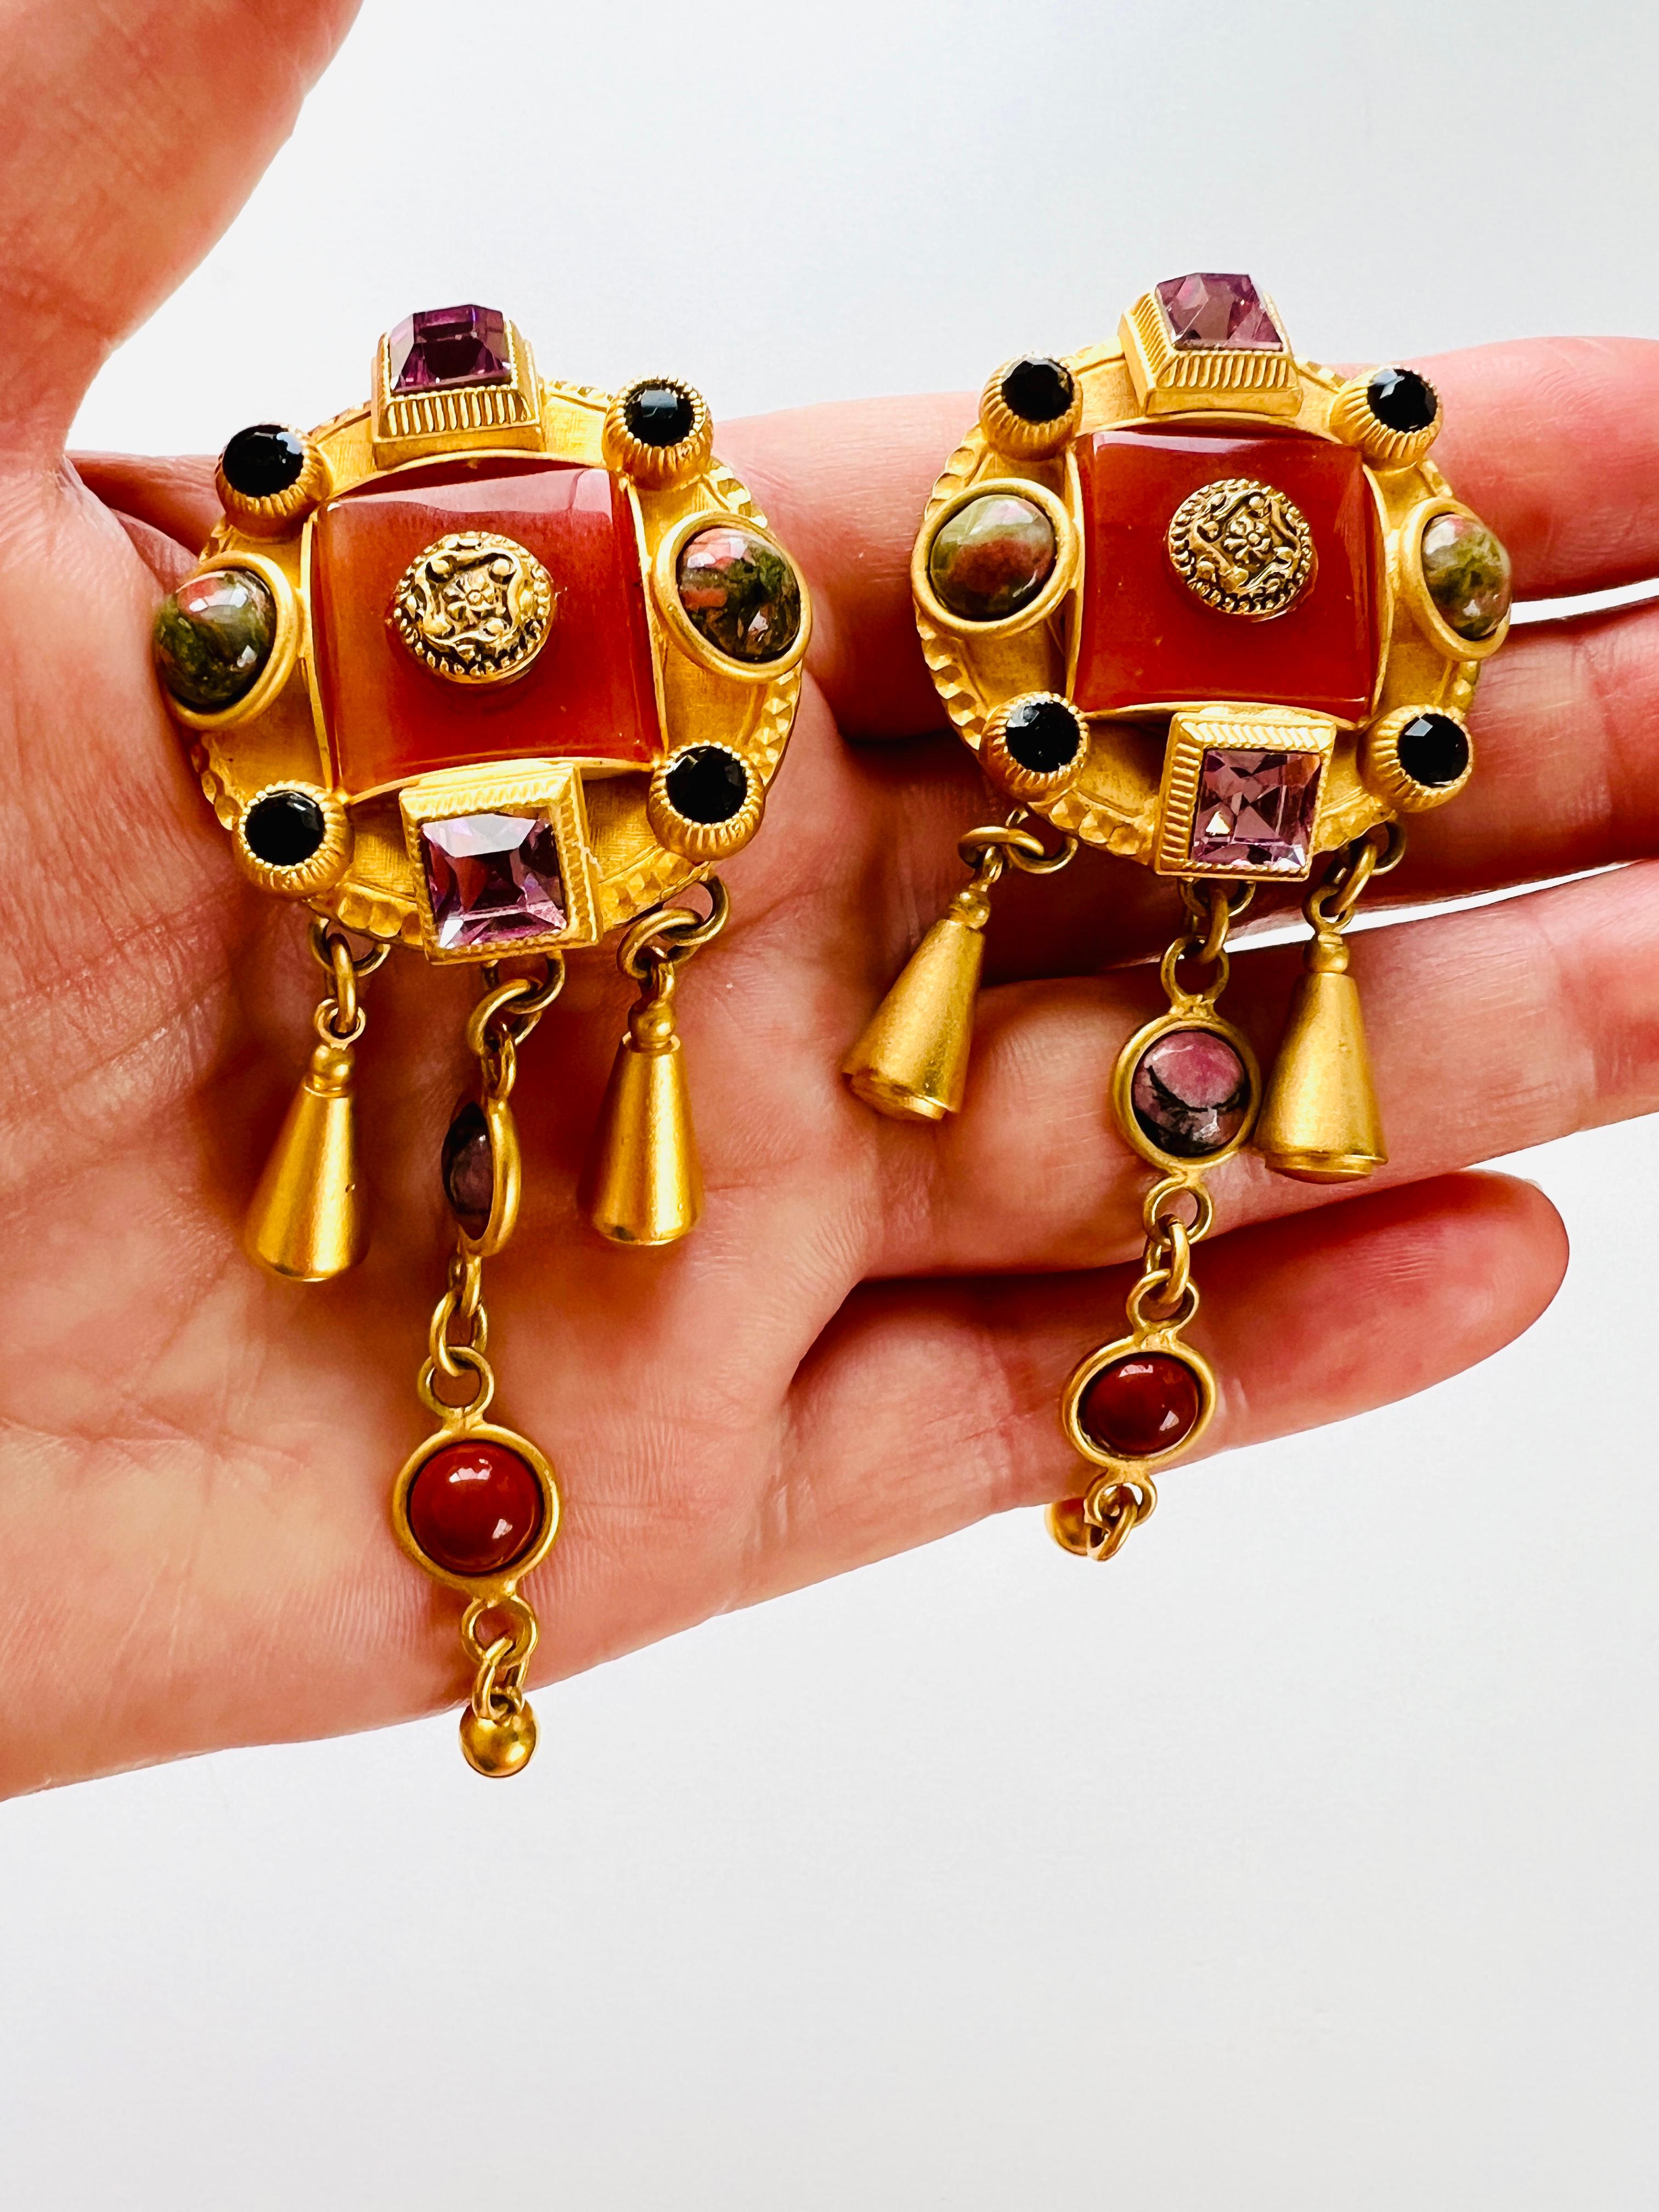 These stunning earrings by Natasha Stambouli showcase a haute couture Etruscan revival style design, adorned with semi-precious stones in vibrant multicolor hues. The earrings feature eleven stones, including Agate and Jasper Chalcedony cabochons